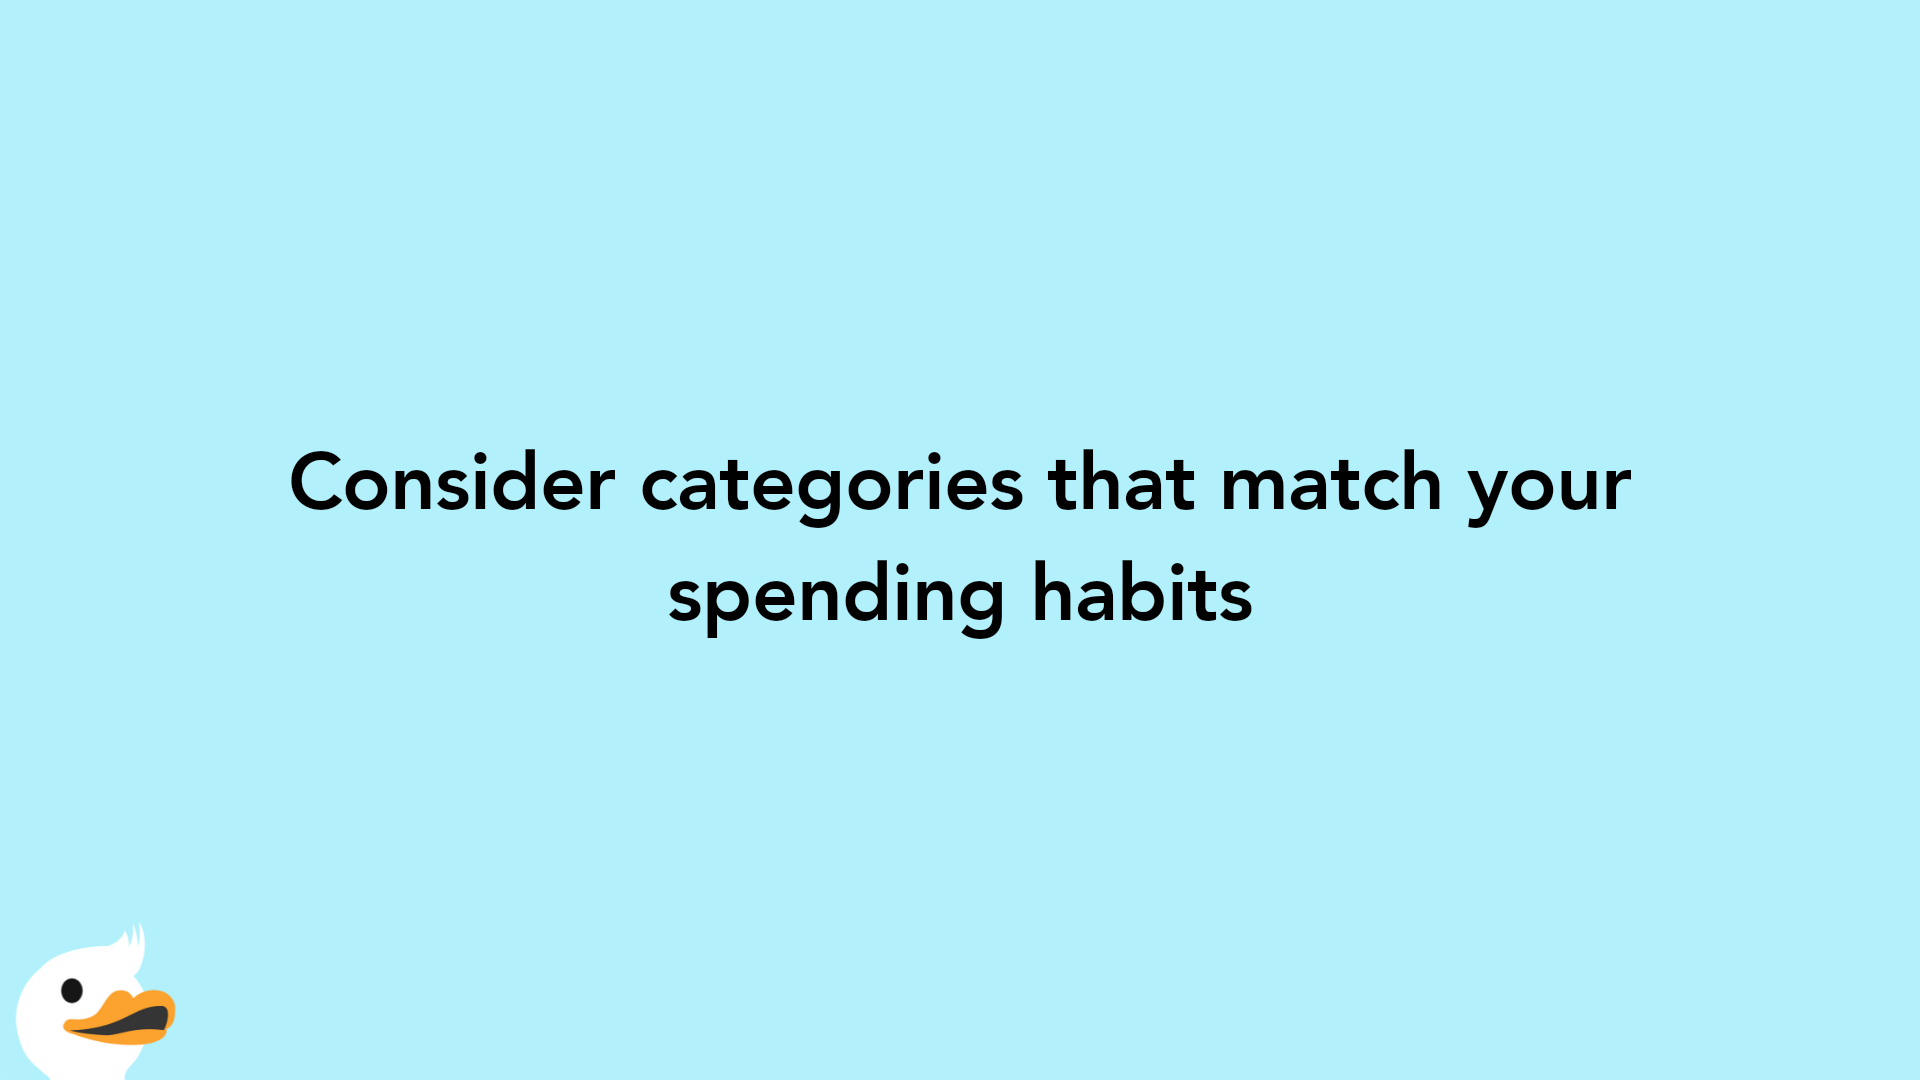 Consider categories that match your spending habits